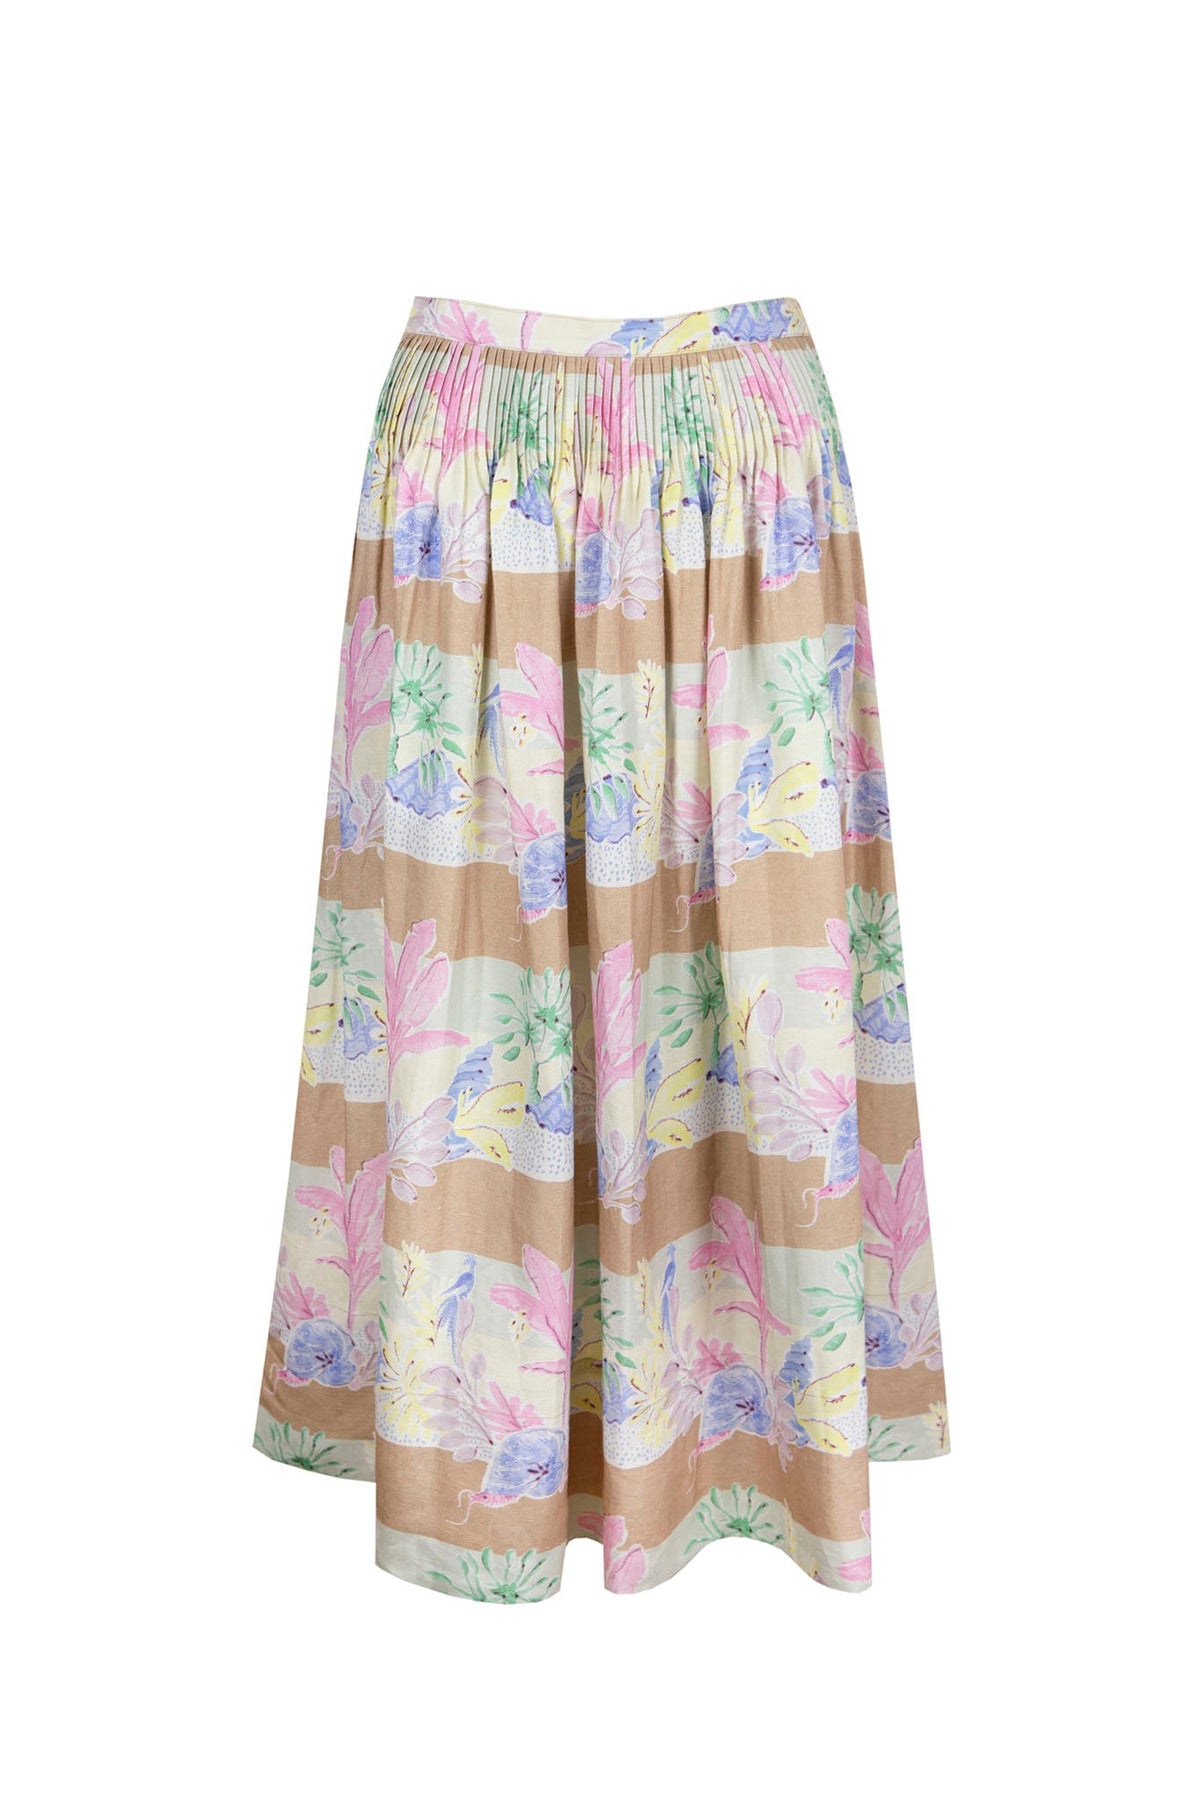 Fallon is a pleated midi skirt with a banded waist, on-seam hip pockets and a hidden side zipper.